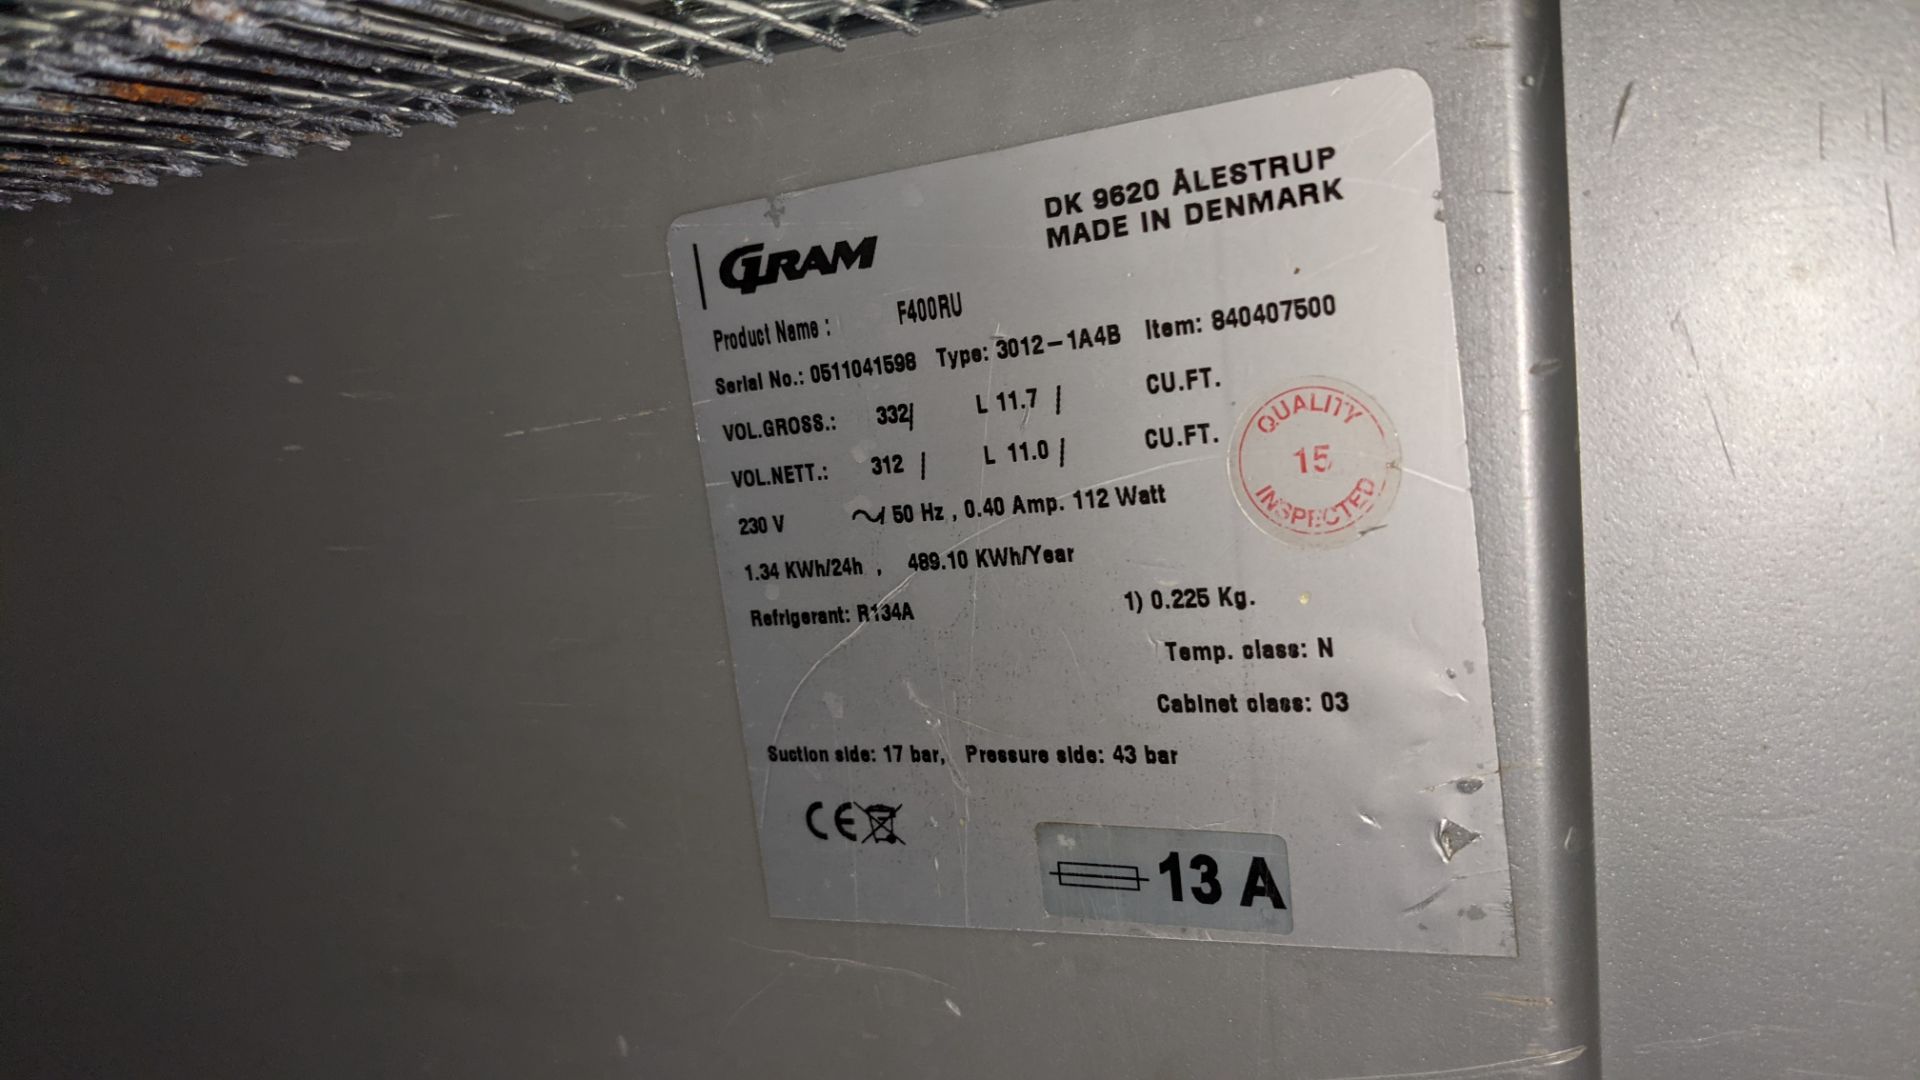 Gram stainless steel upright mobile freezer - Image 5 of 5